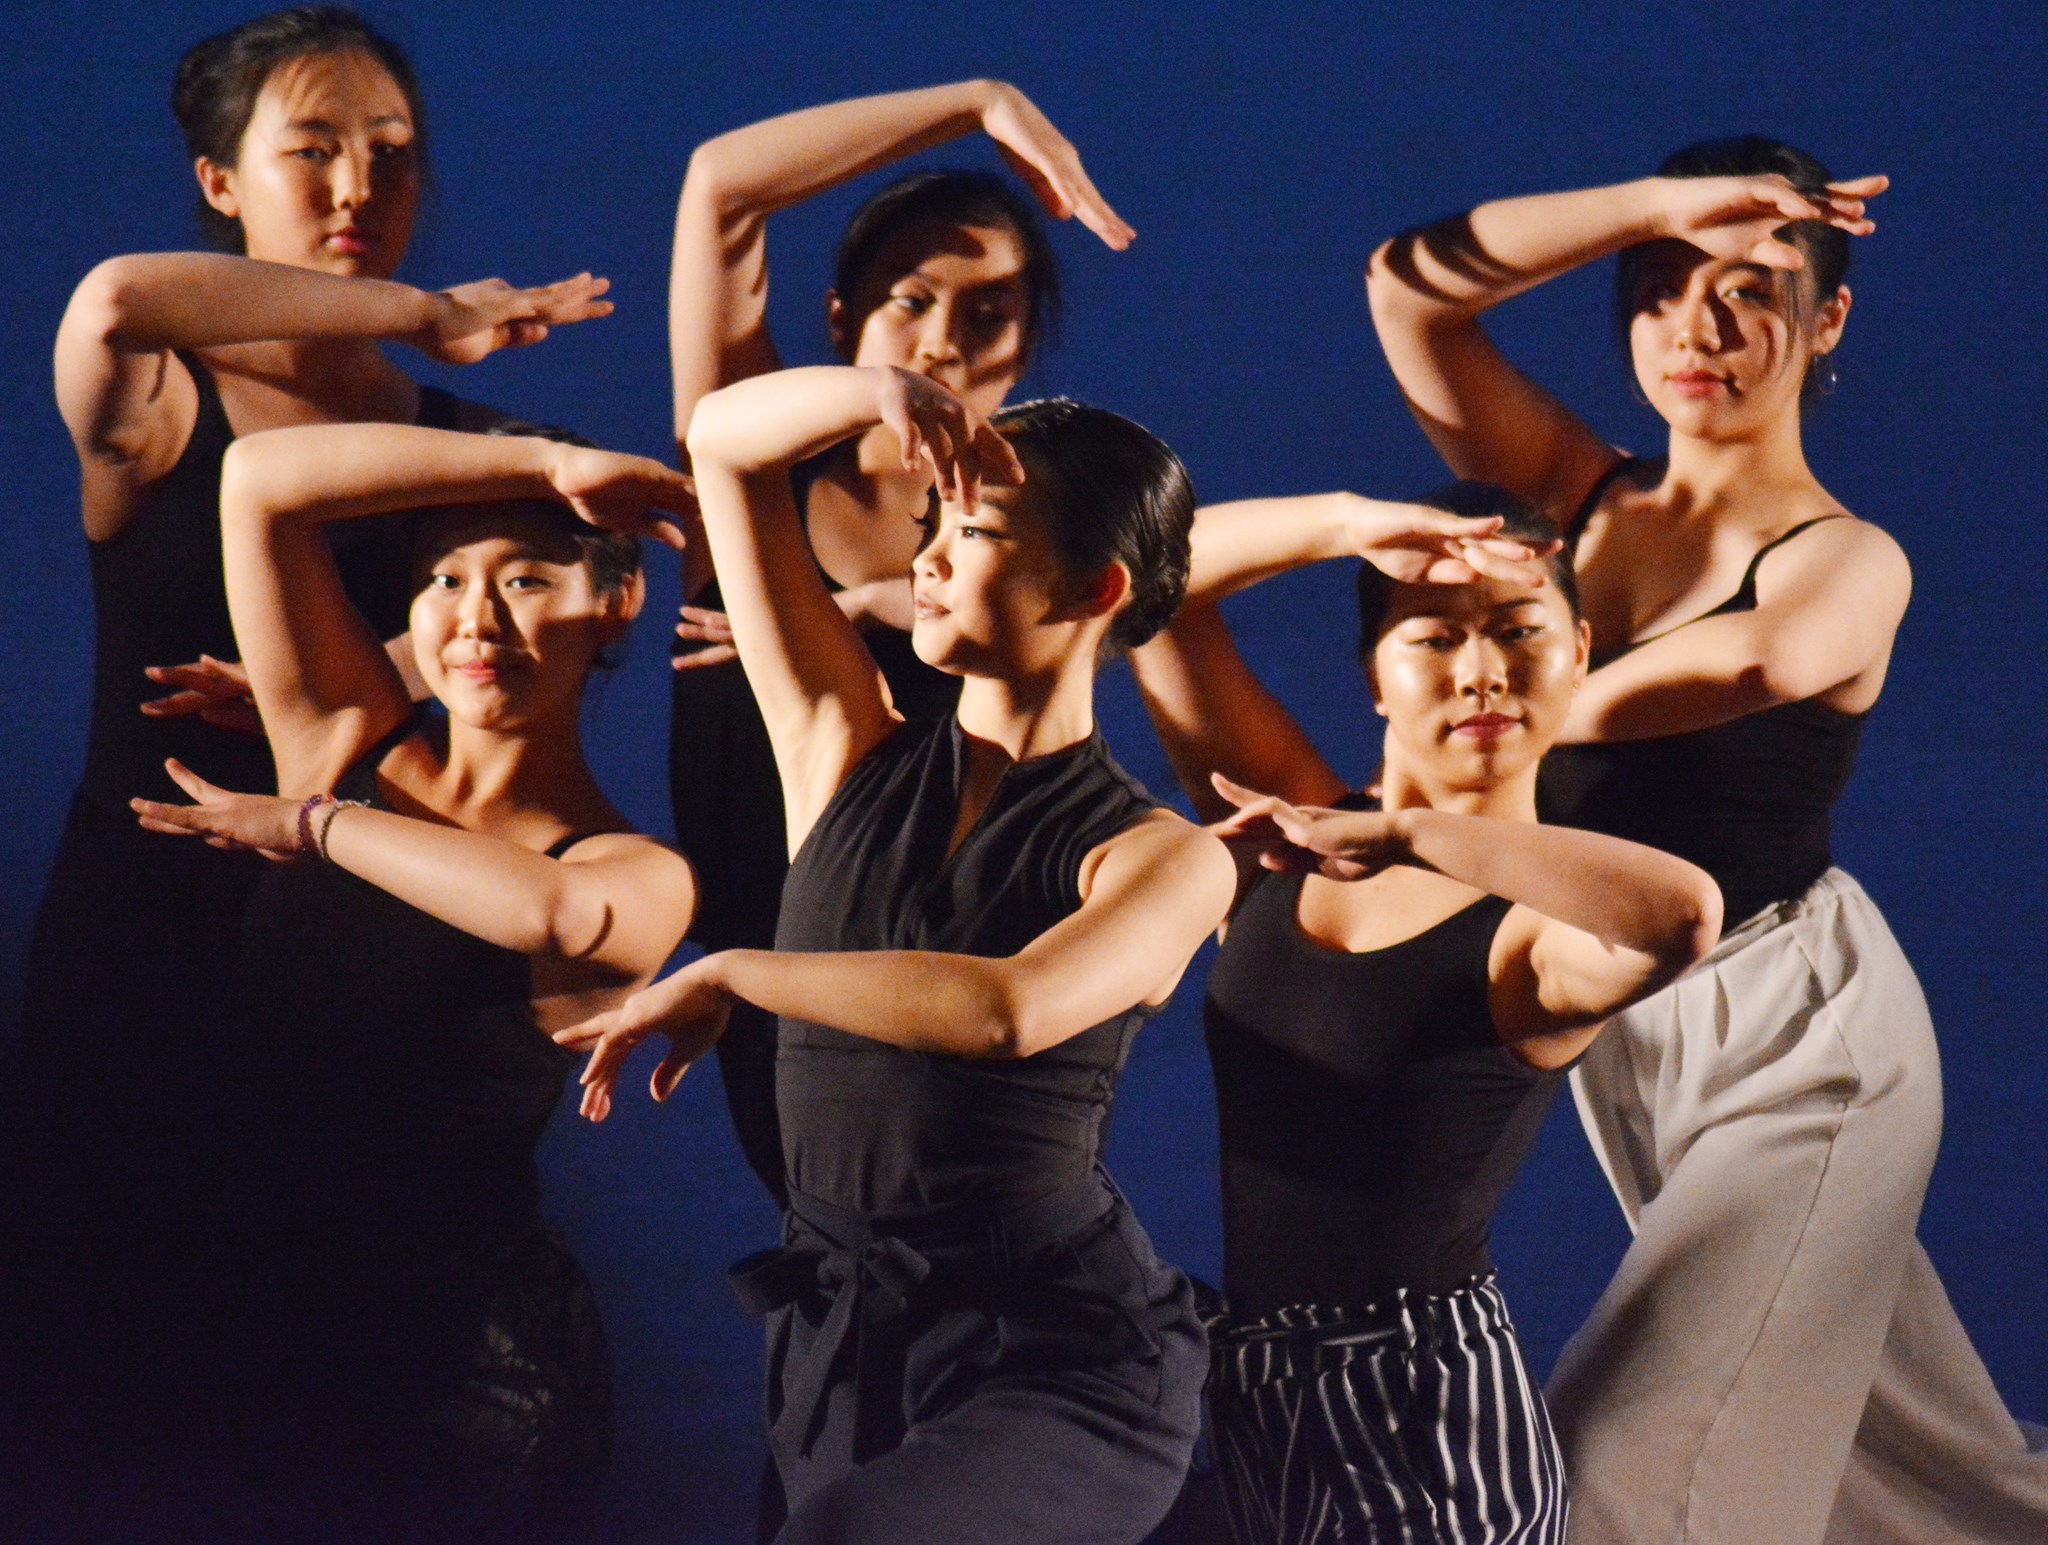 Photo of dancers with arched arms, silhouetted against a dark background